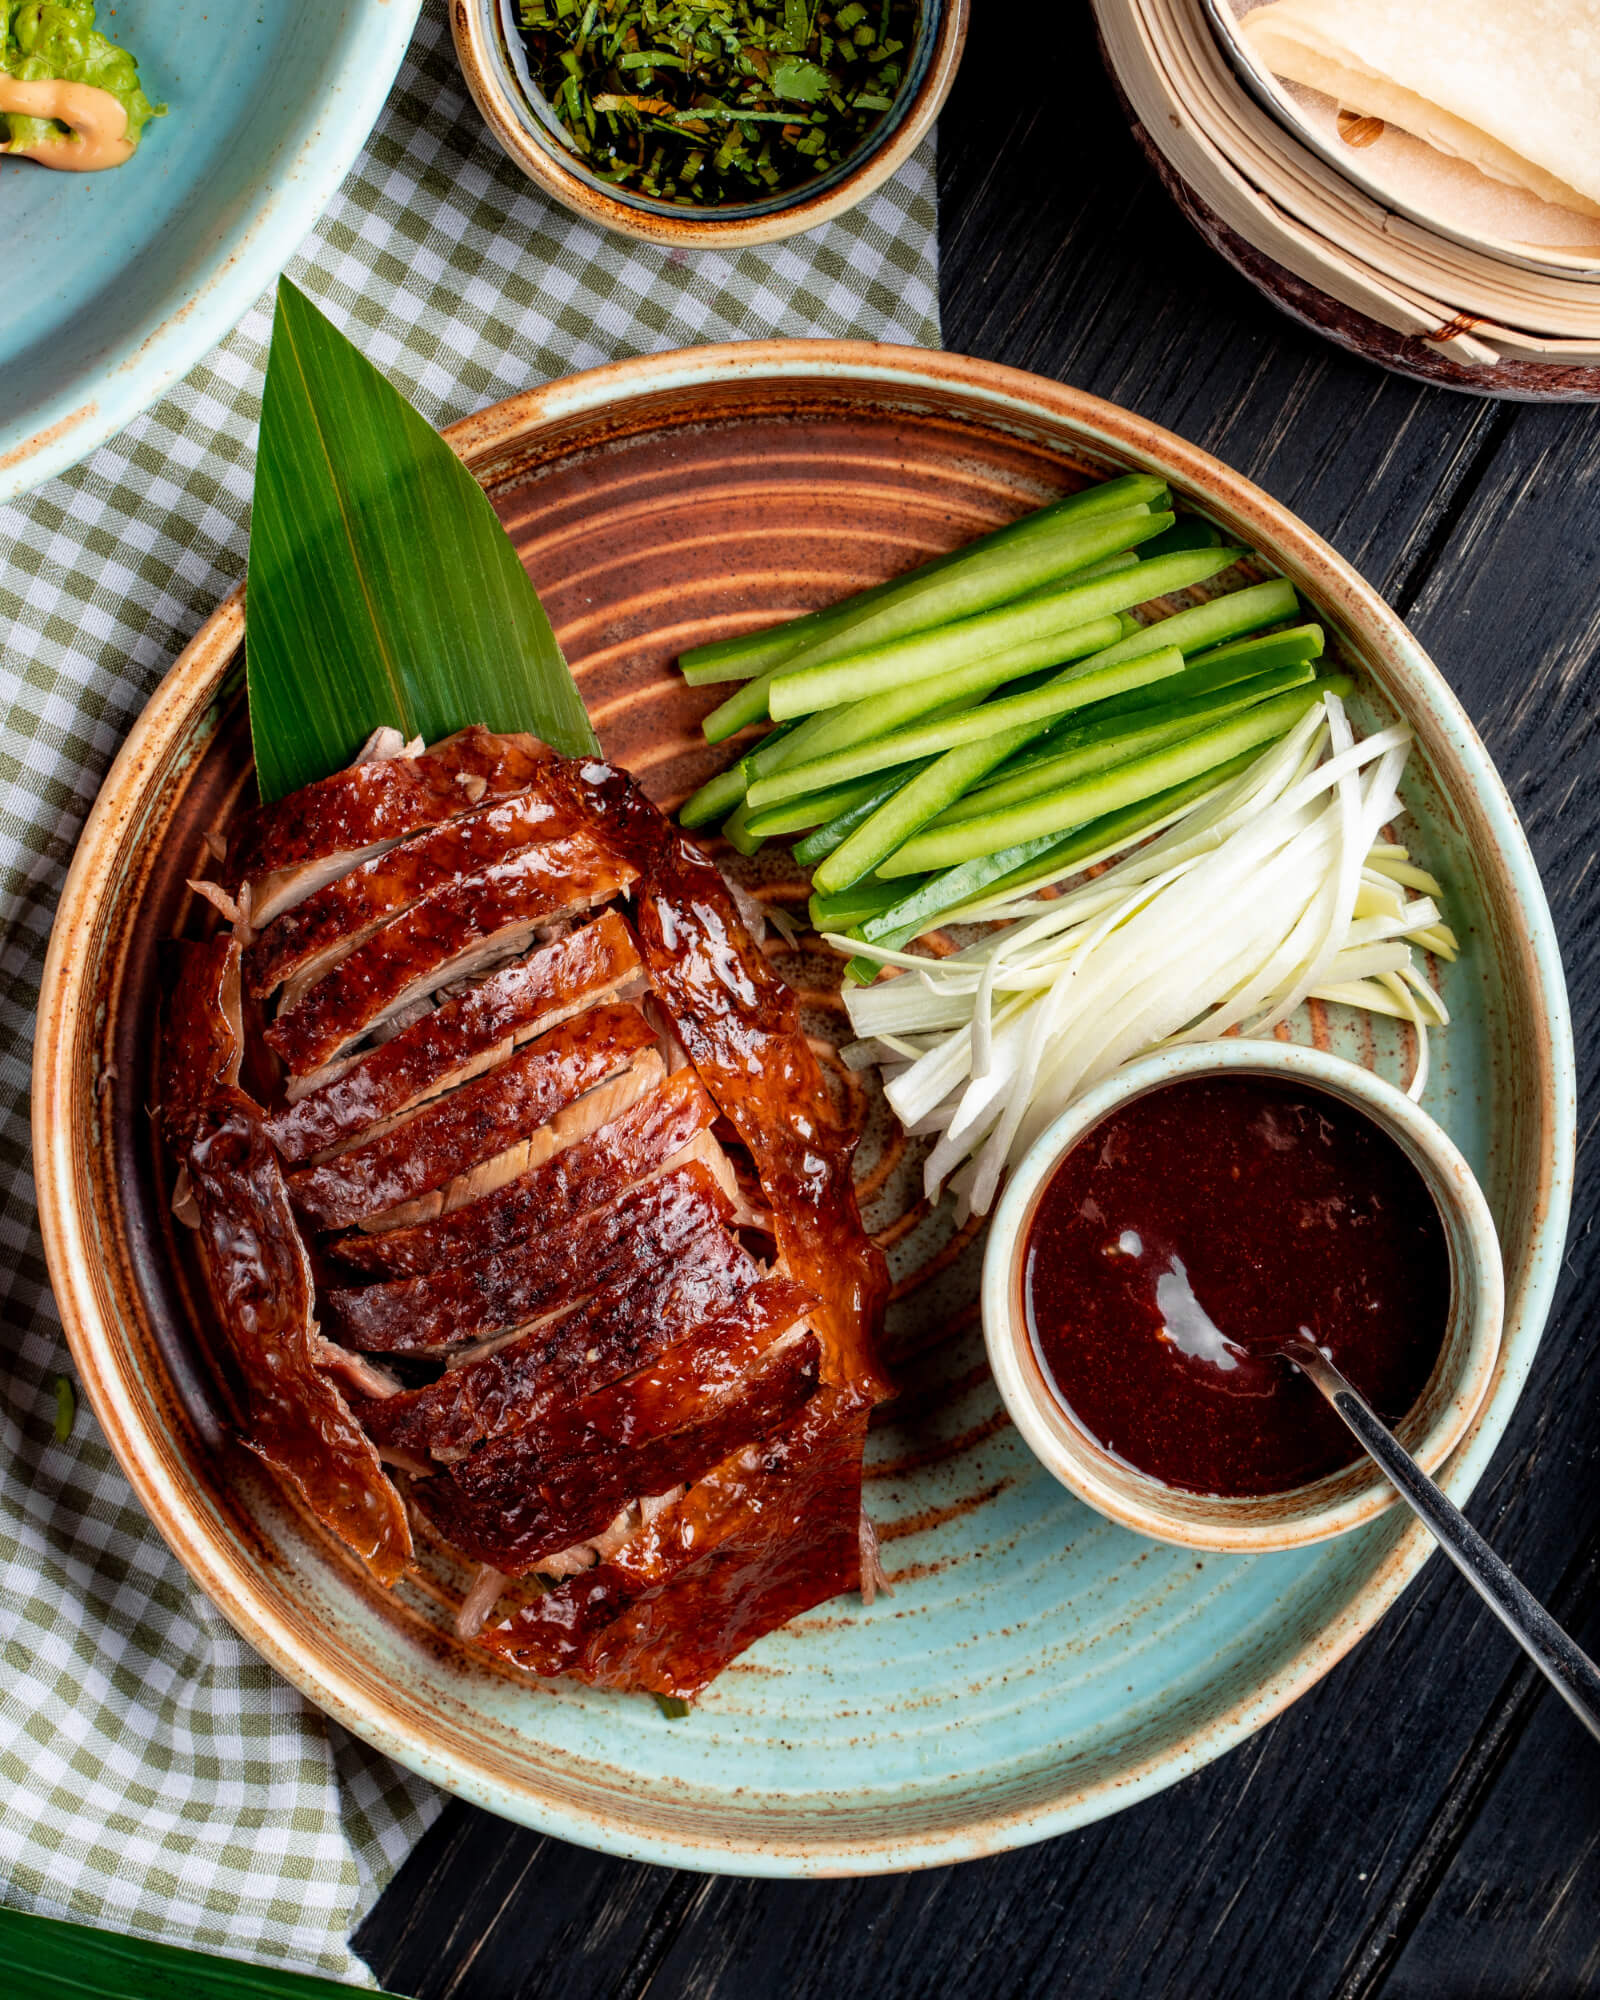 The crispy roasted goose is a popular Hong Kong Chinses food